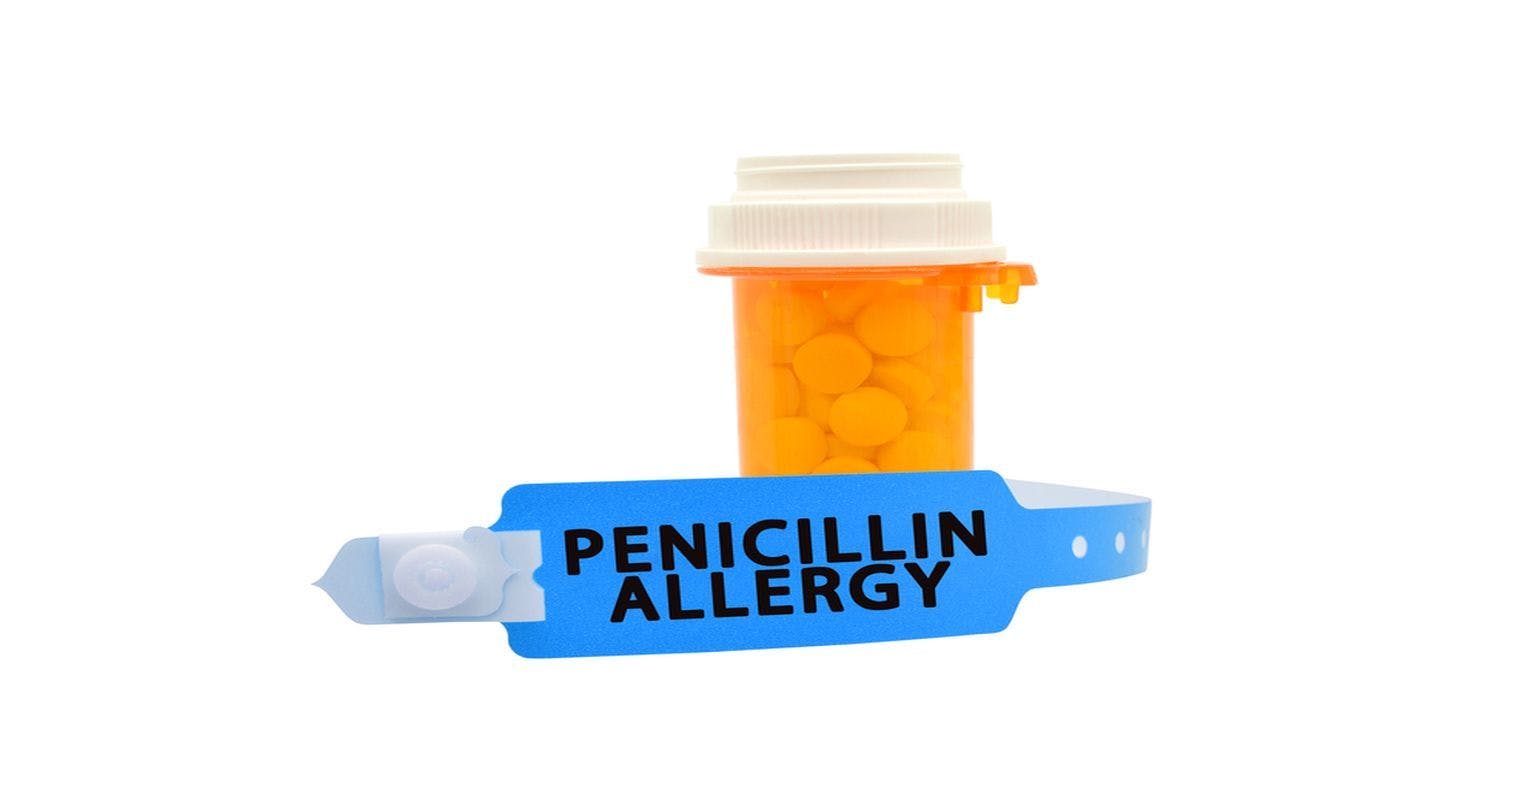 JAMA Report Outlines Recommendations for Evaluation and Management of Penicillin Allergy